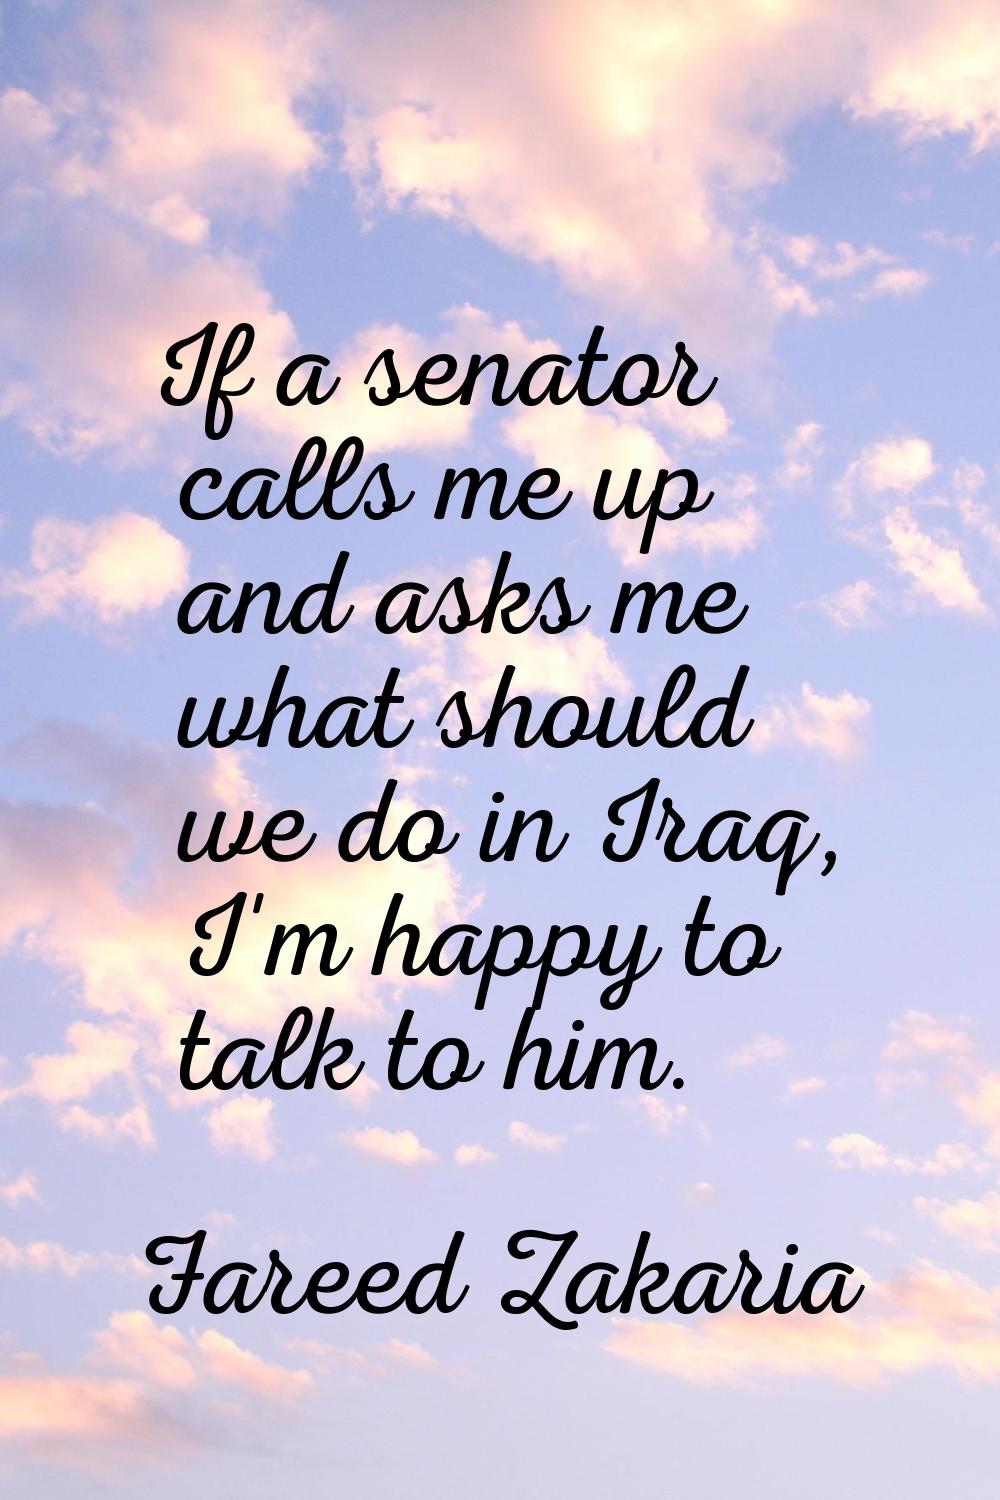 If a senator calls me up and asks me what should we do in Iraq, I'm happy to talk to him.